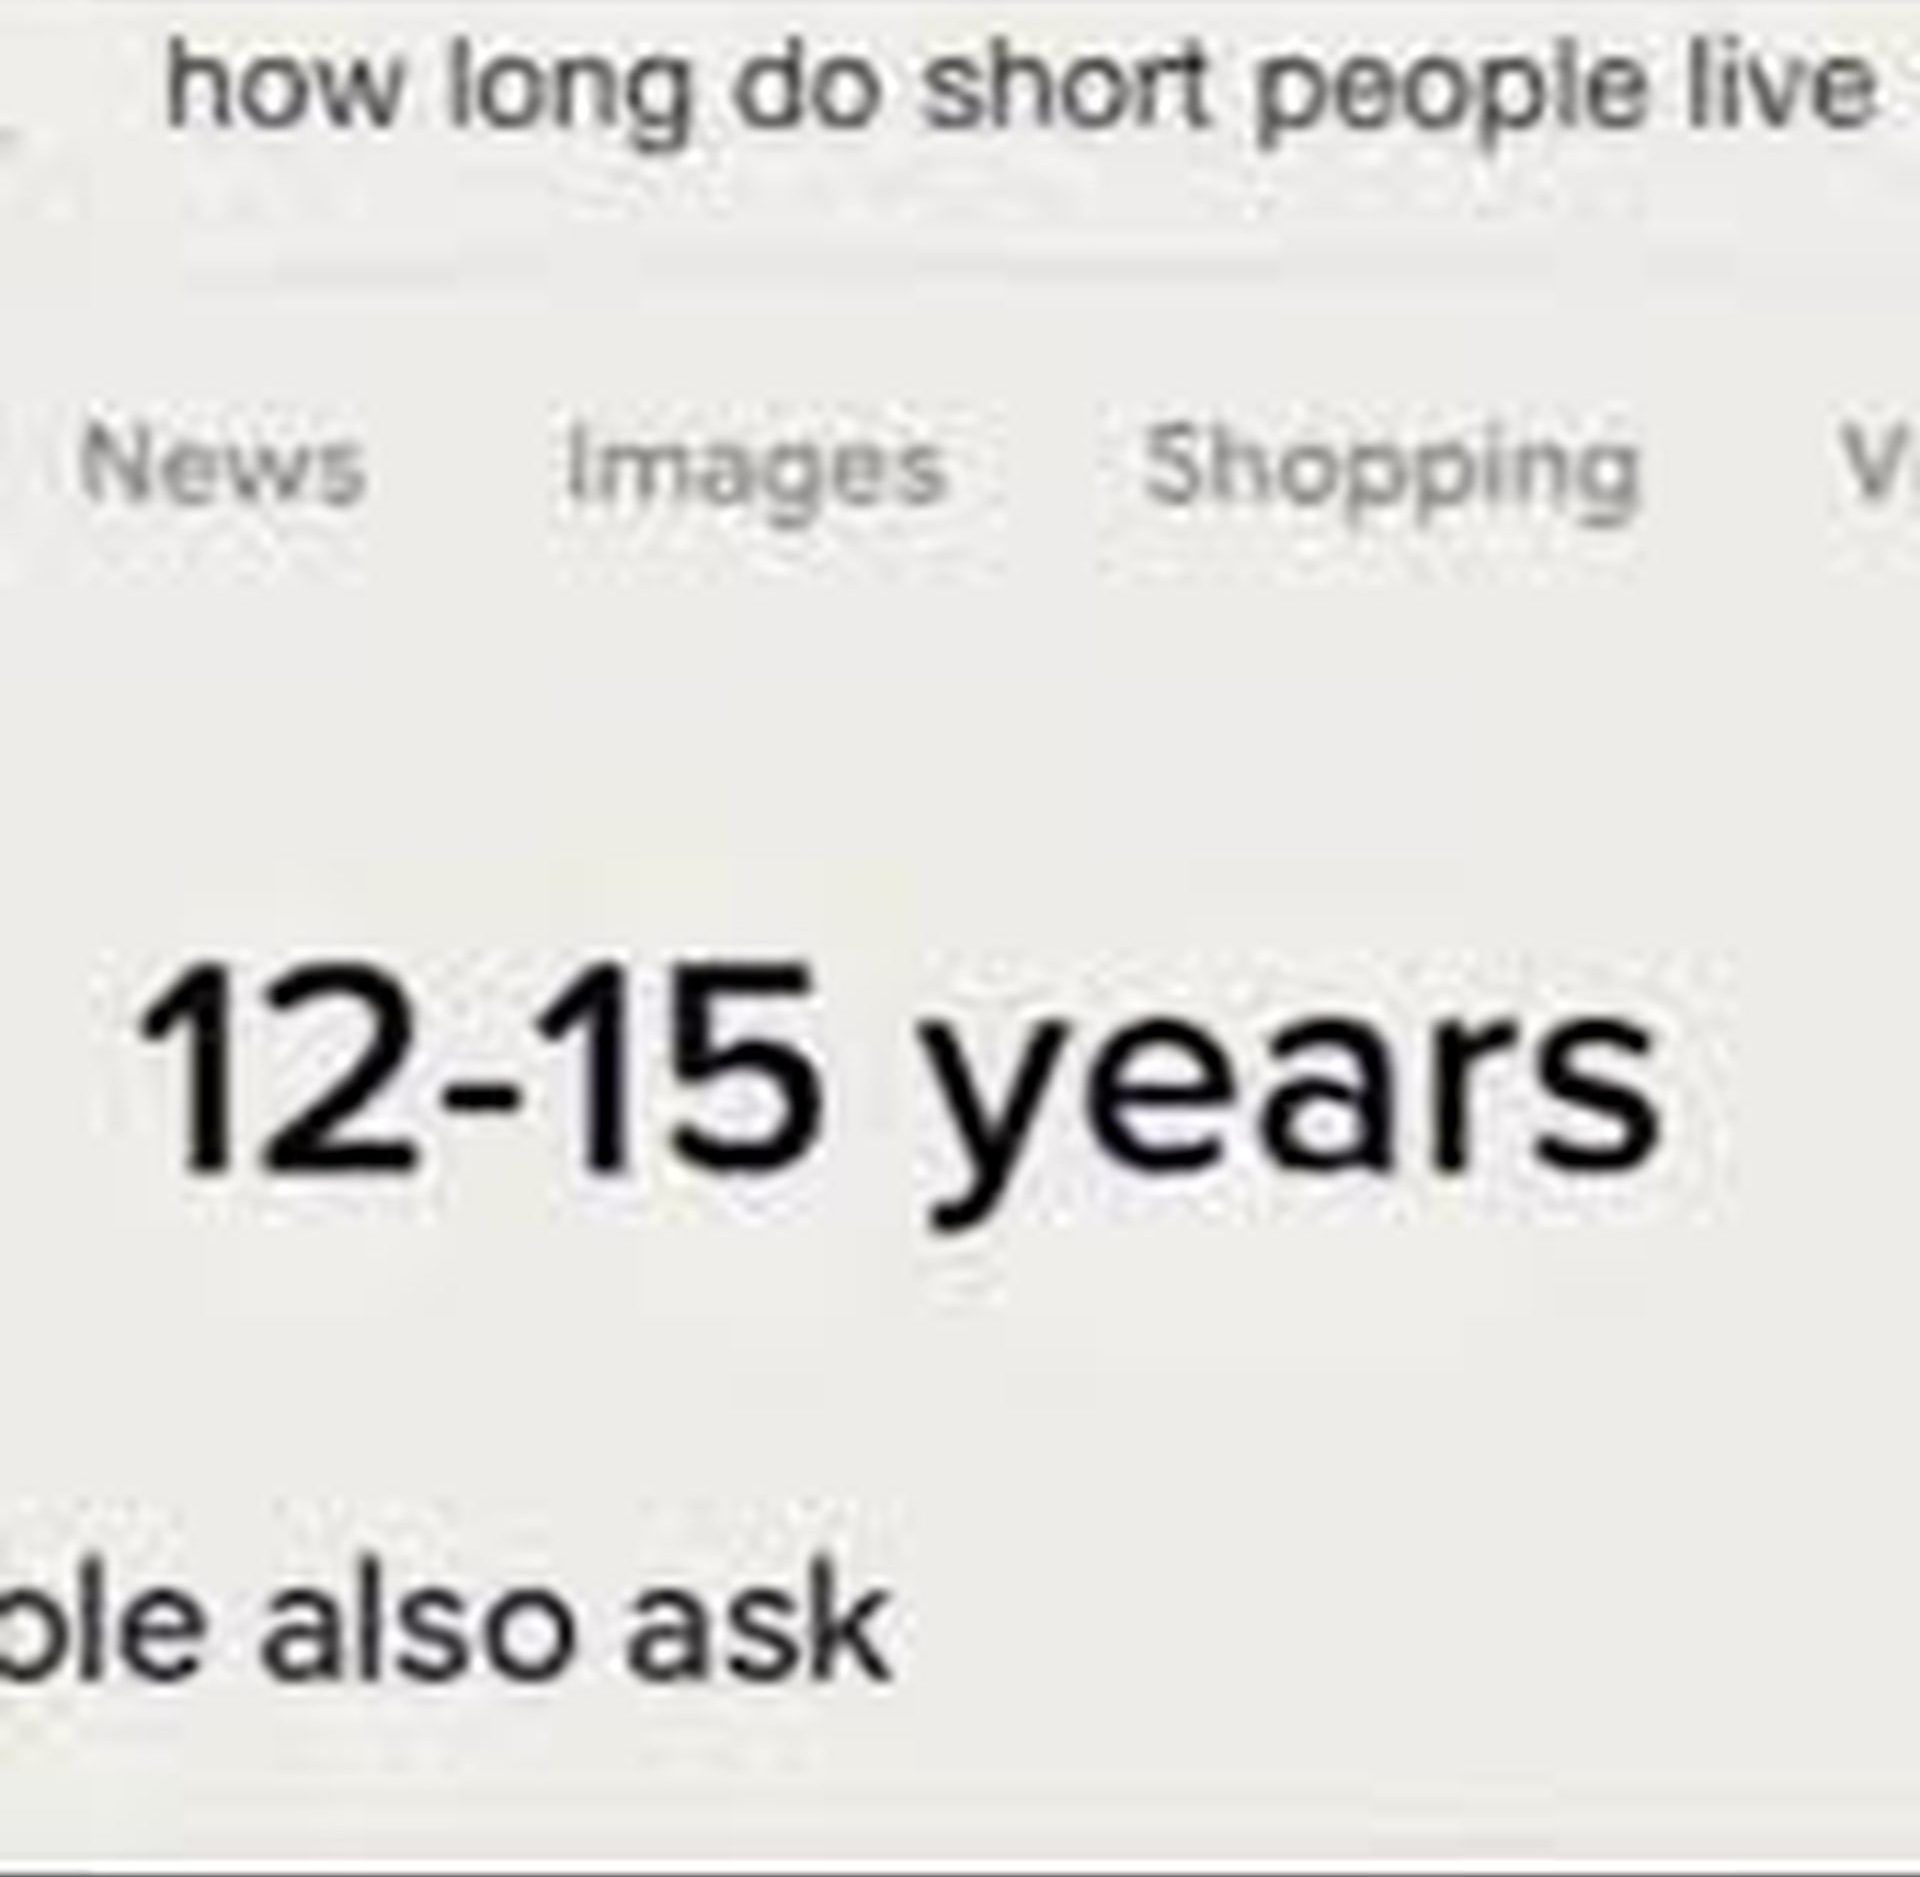 How long do short people live